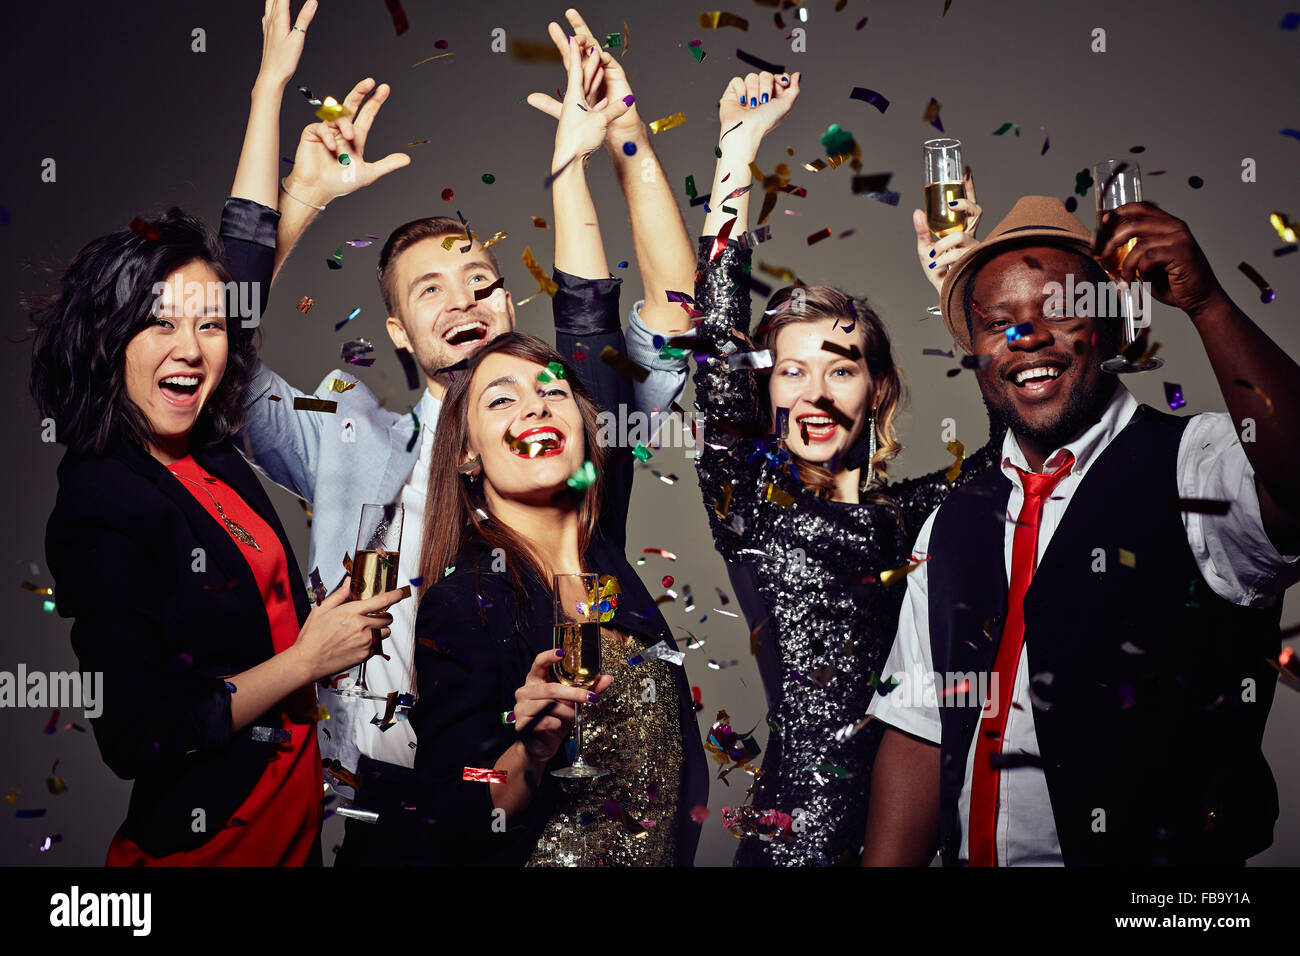 Group of happy smiling friends having fun together among confetti in night club Stock Photo